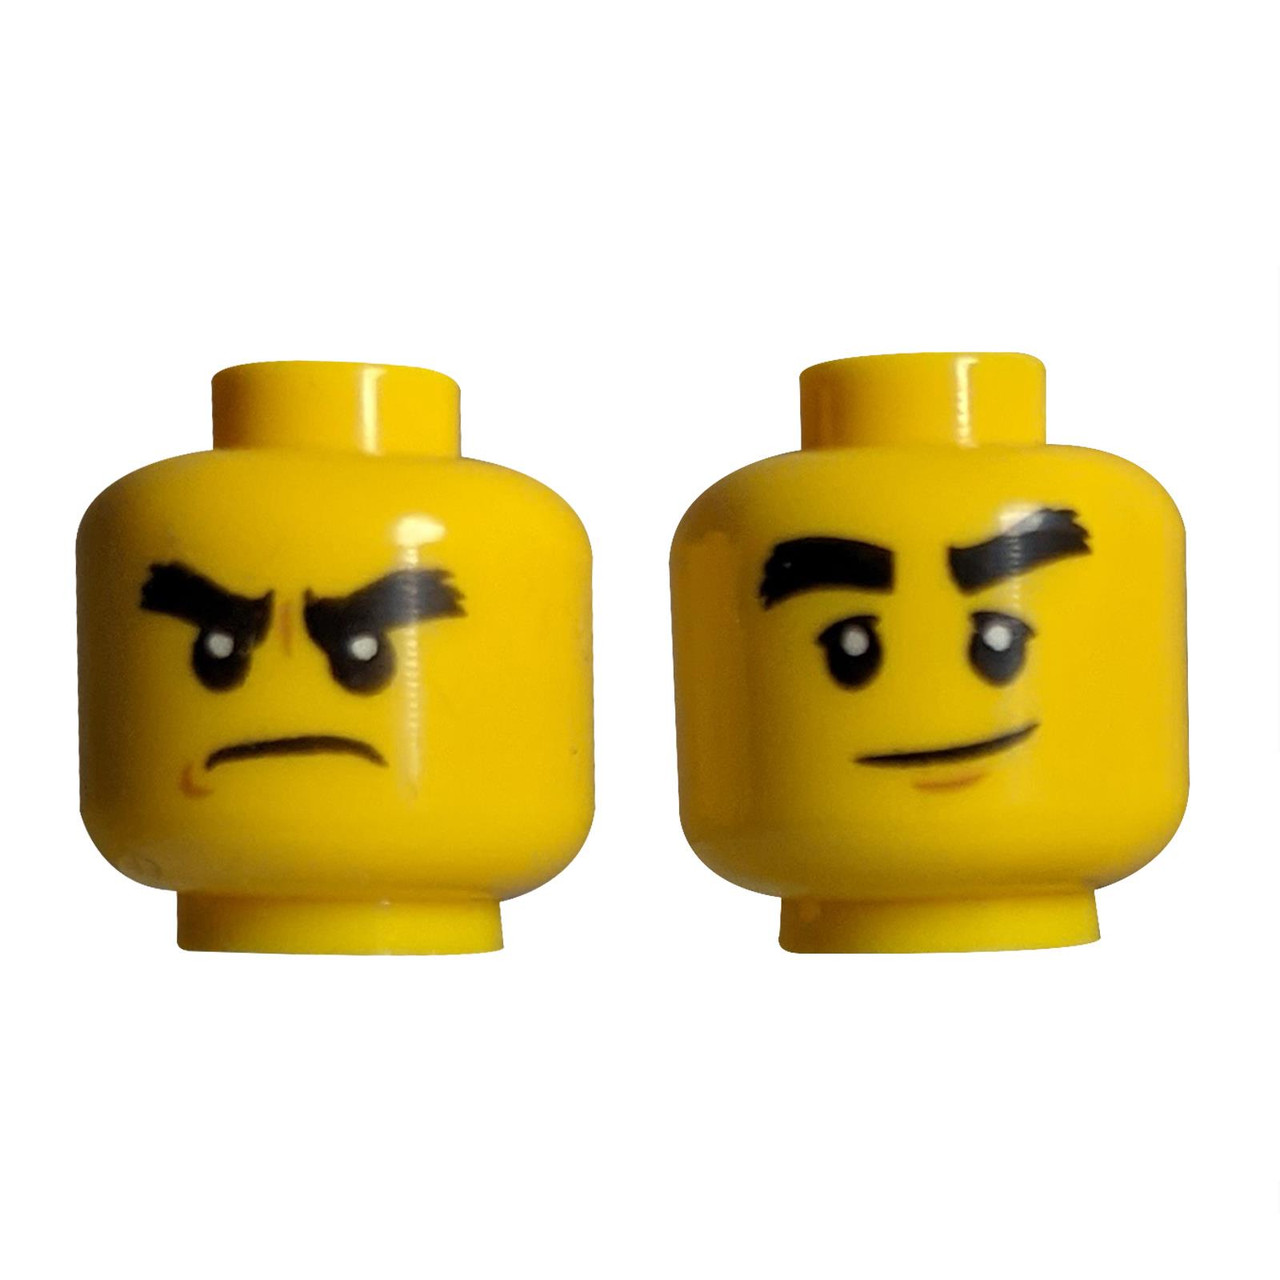 Express Emotions with LEGO® Head 3626cpb1893 - Dual Sided - / Angry, Black Bushy Eyebrows Pattern!